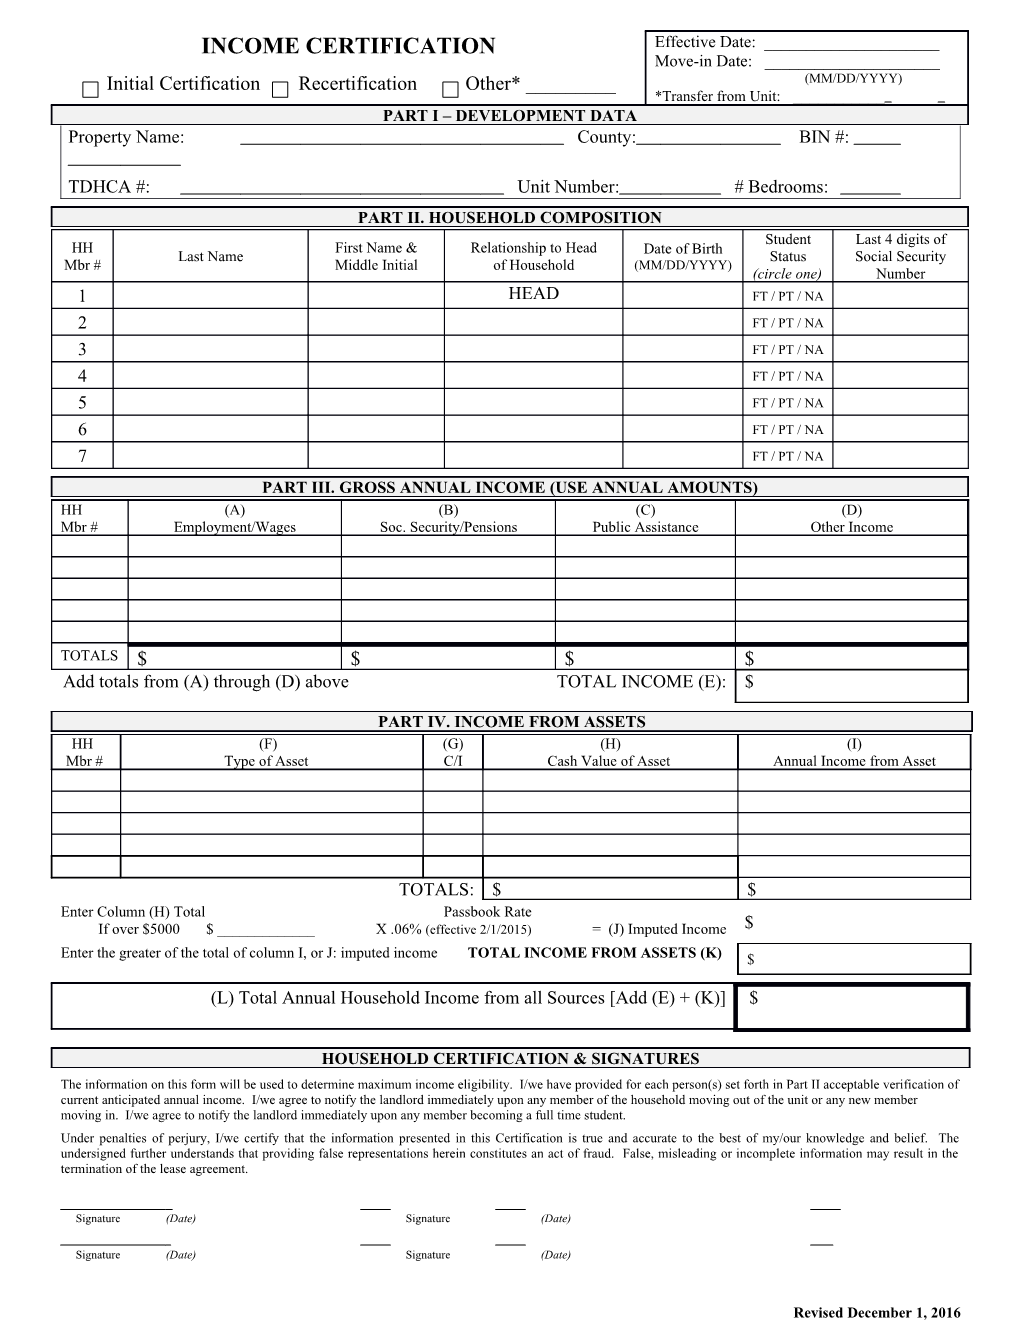 Income Certification Form (DOC) (Effective 2/1/2015)